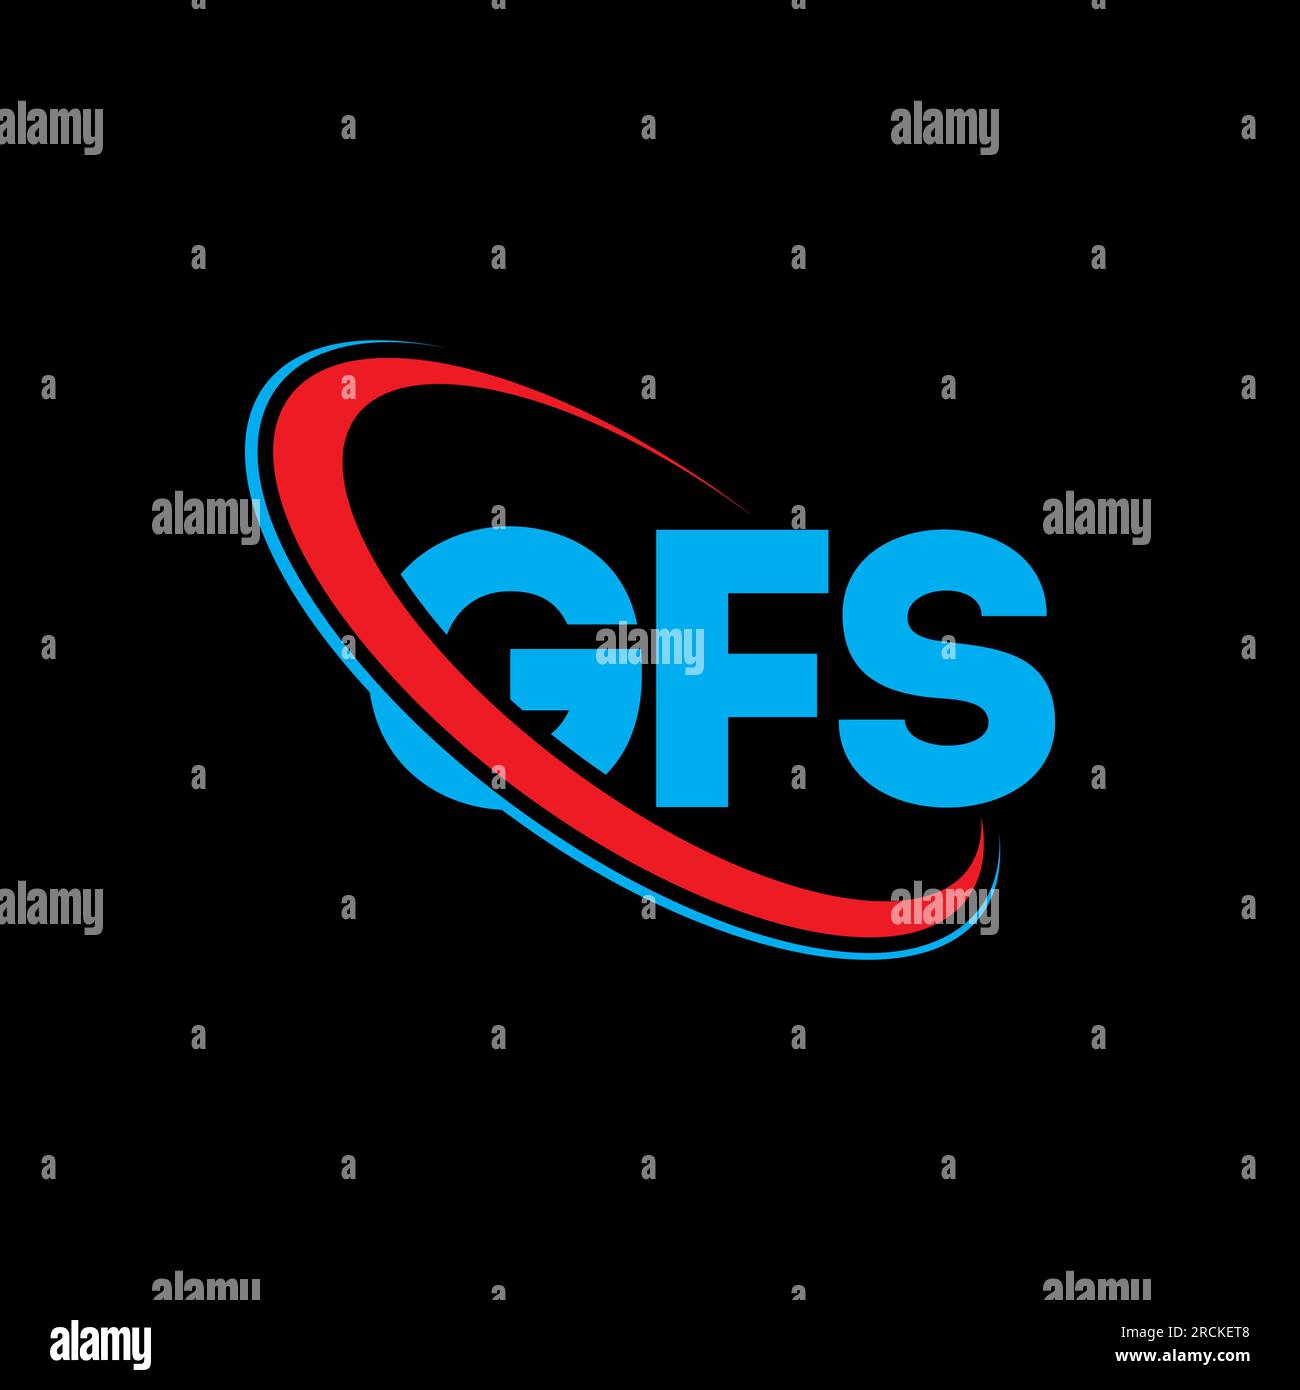 GFS logo. GFS letter. GFS letter logo design. Initials GFS logo linked with circle and uppercase monogram logo. GFS typography for technology, busines Stock Vector